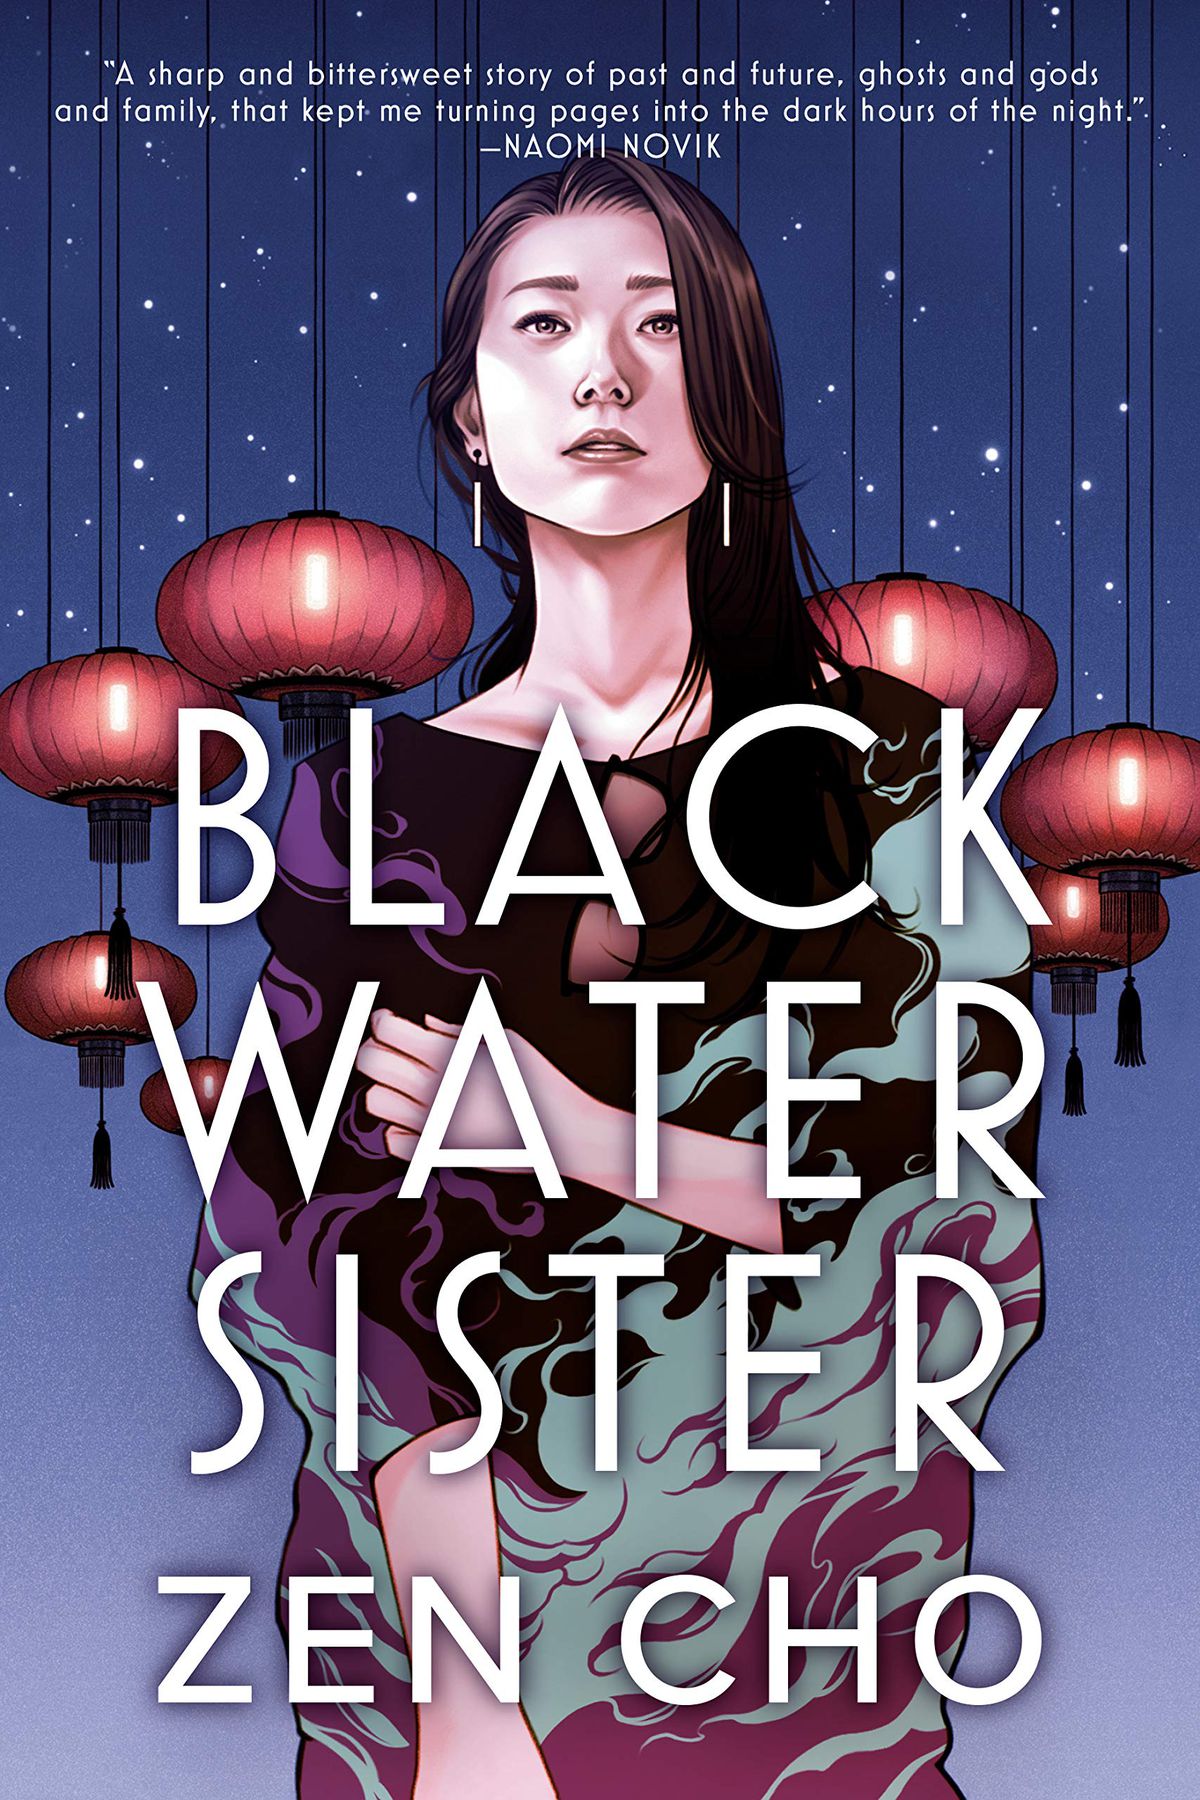 The cover for “Black Water Sister” by Zen Cho which shows an Asian woman standing under hanging paper lanterns.